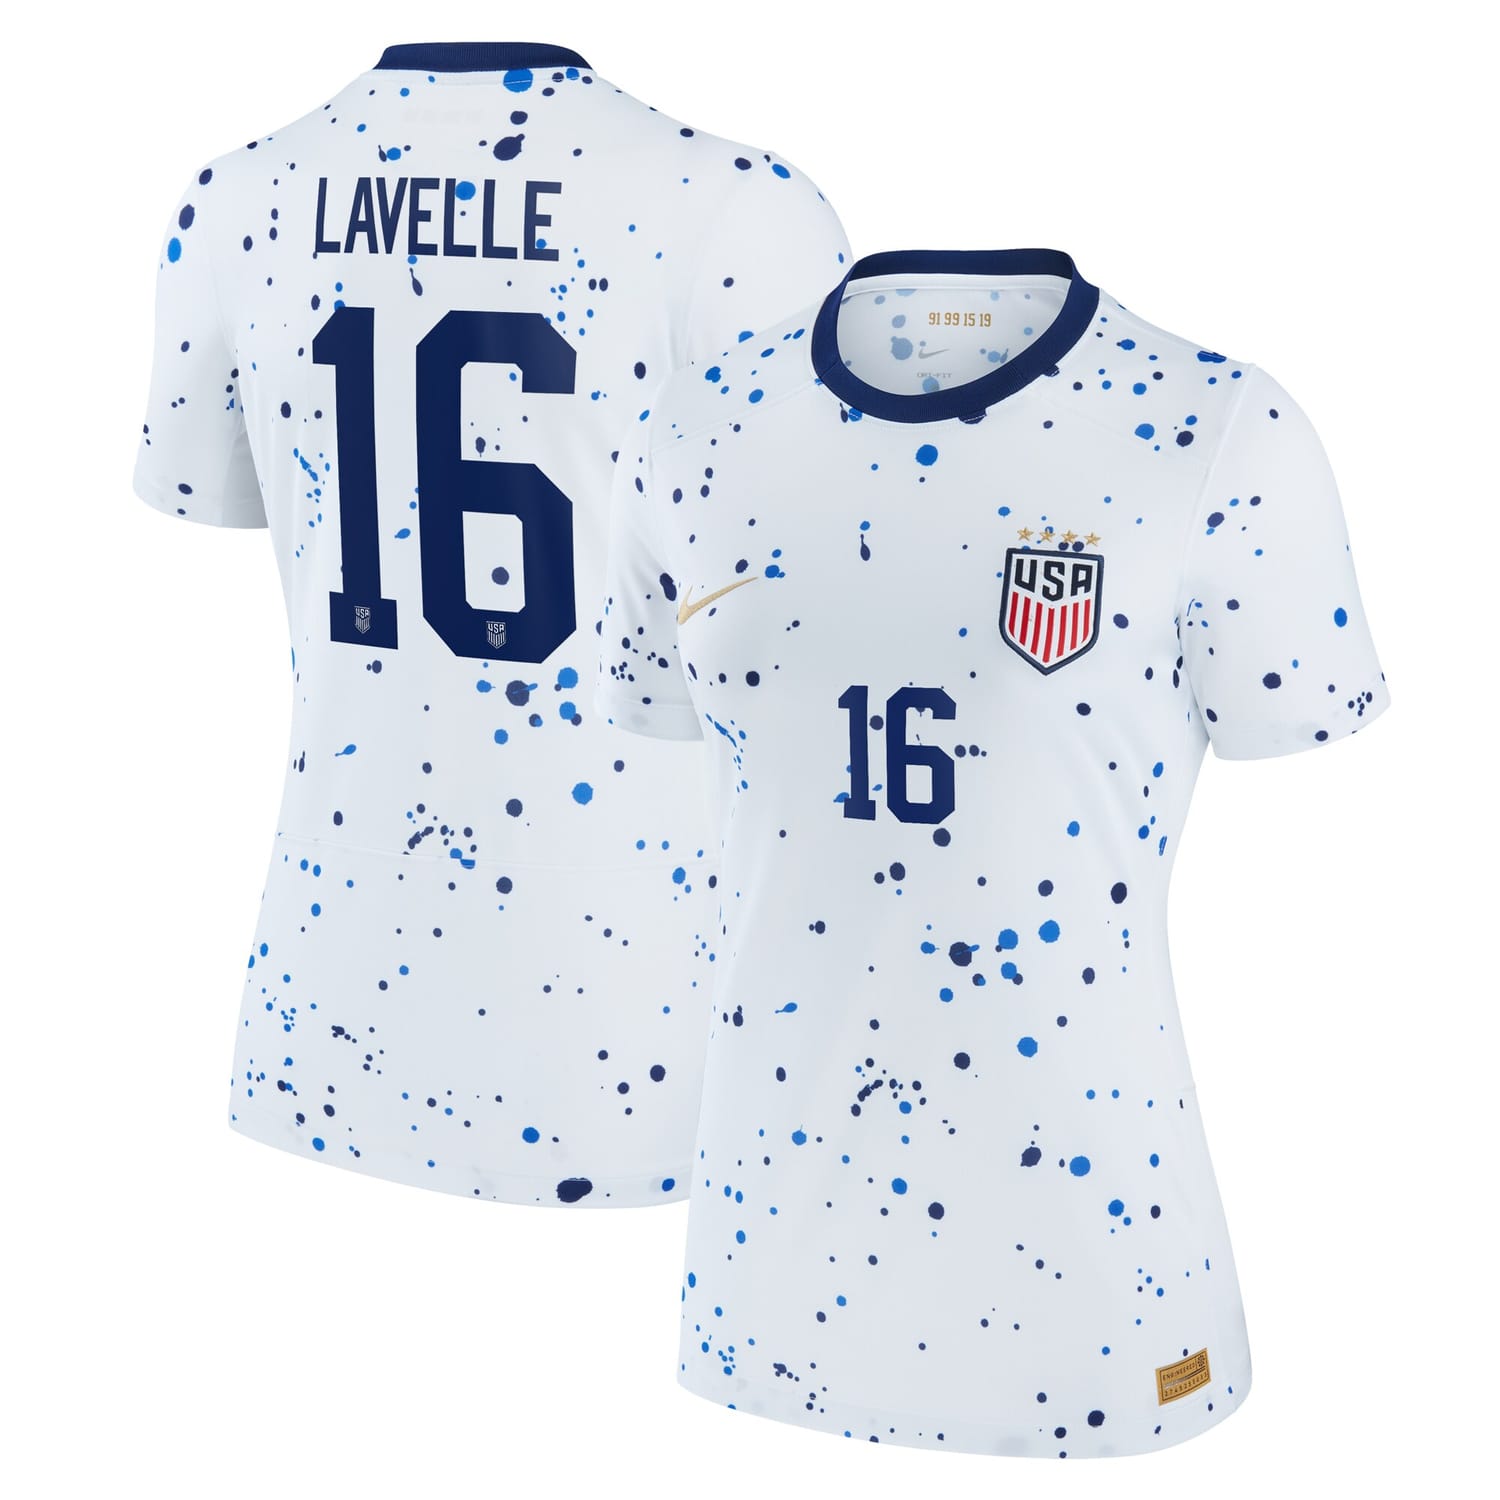 USWNT Home Jersey Shirt White 2023 player Rose Lavelle printing for Women